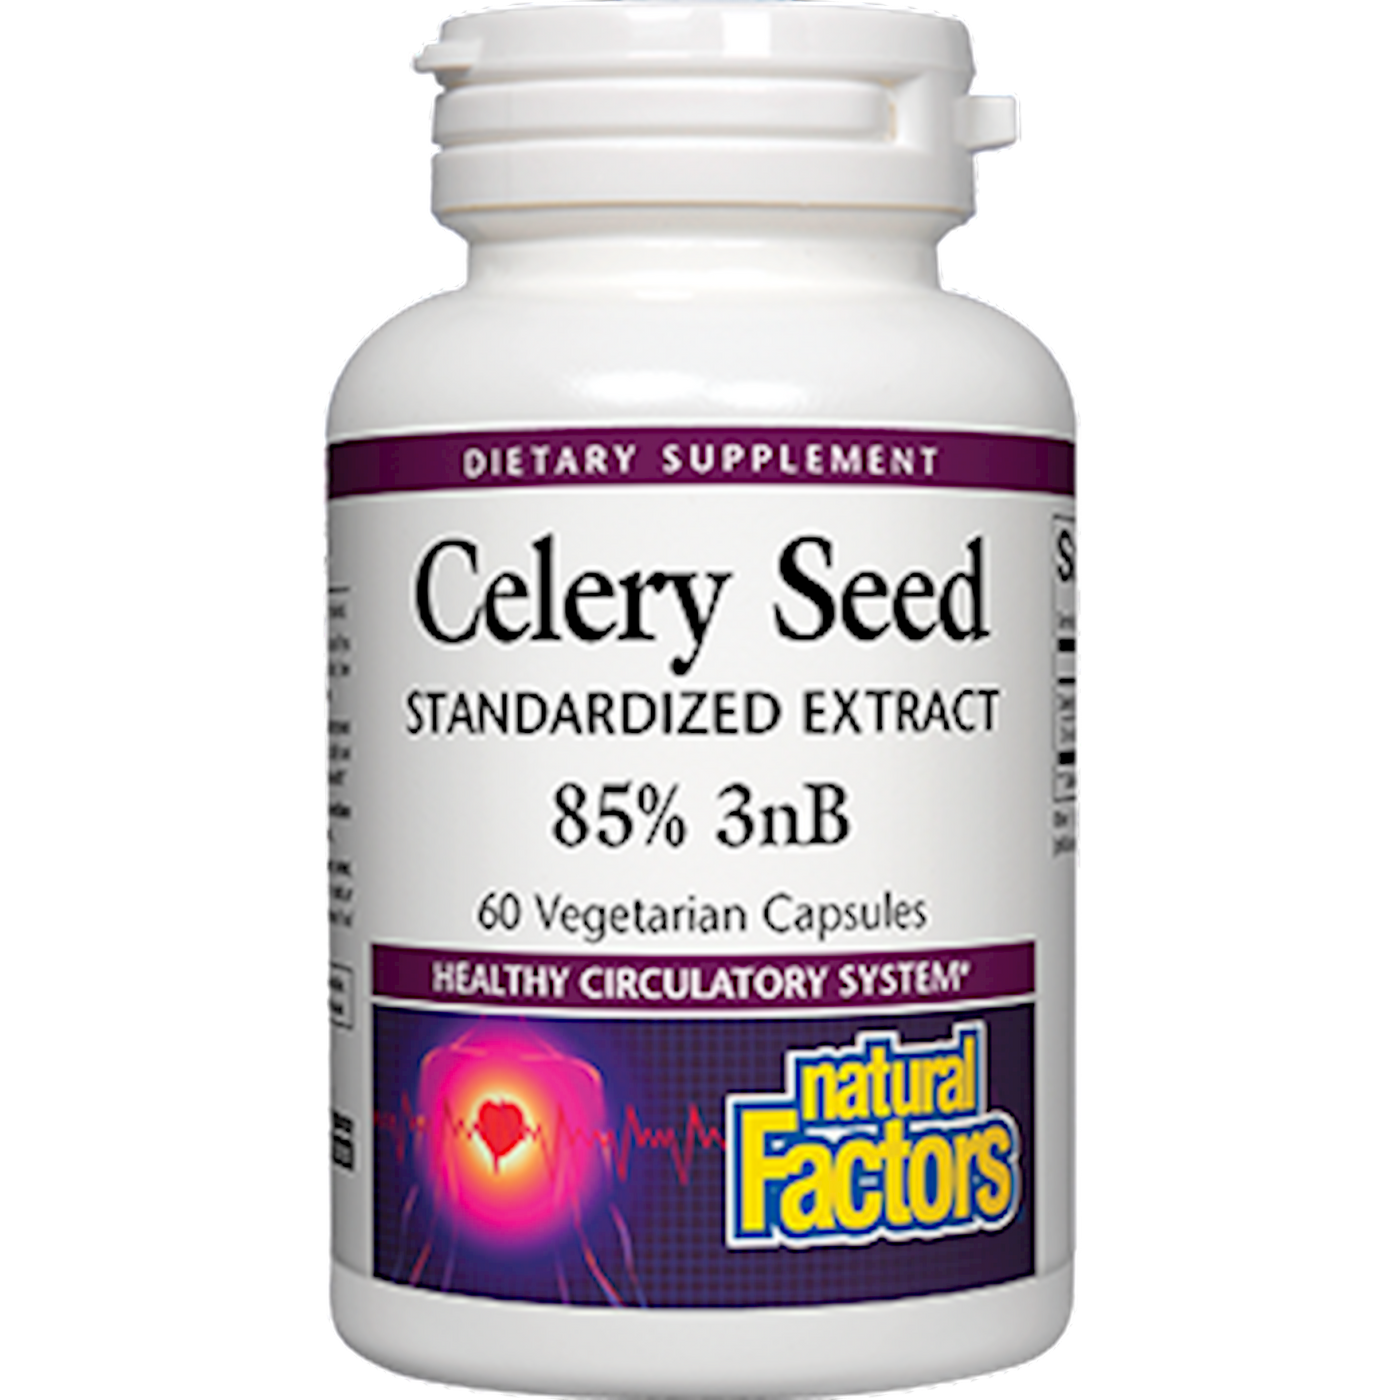 Celery Seed Extract 60 vcaps Curated Wellness